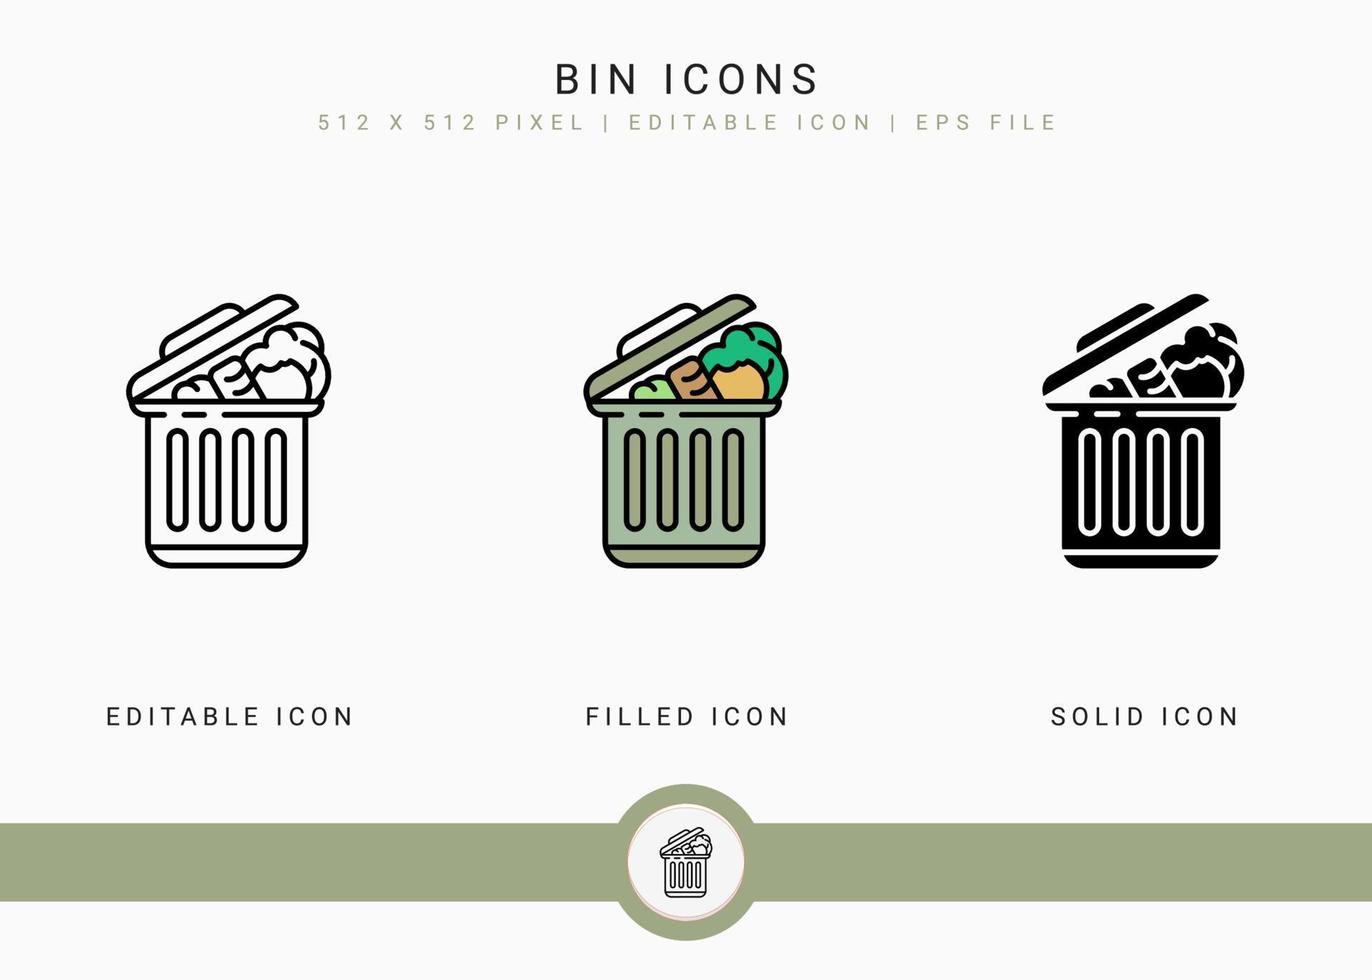 Bin icons set vector illustration with solid icon line style. Dust garbage basket concept. Editable stroke icon on isolated background for web design, user interface, and mobile app